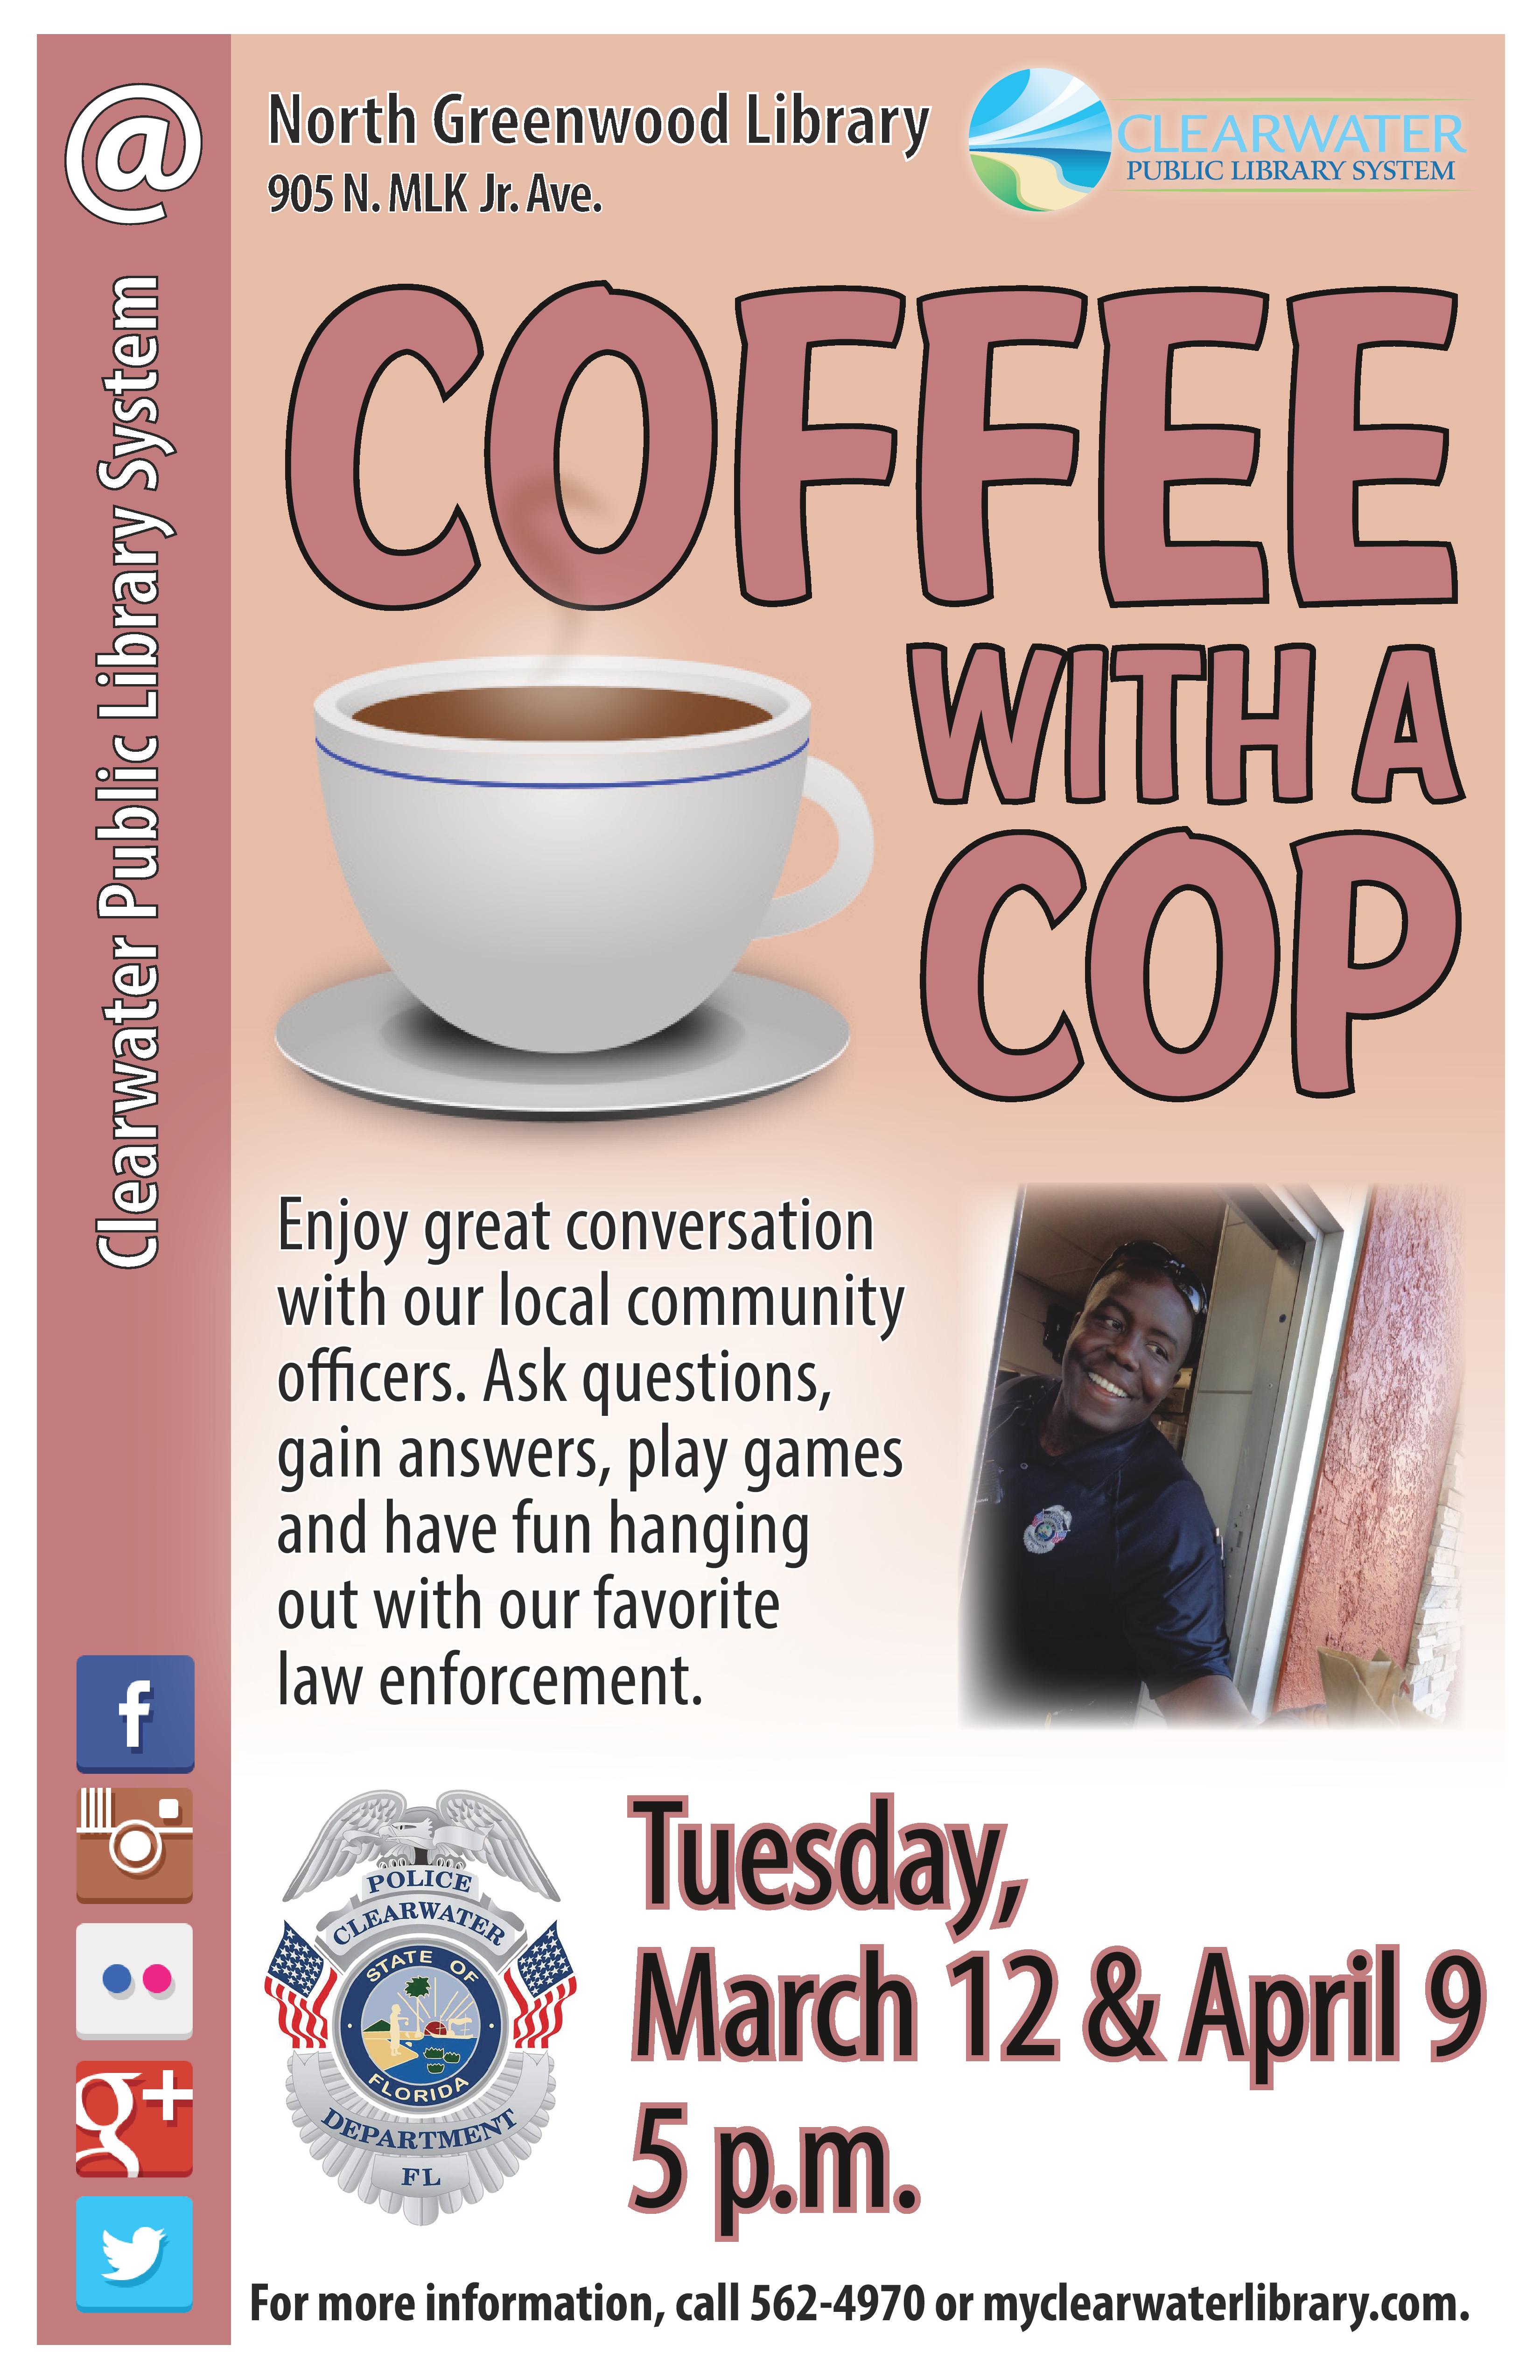 Enjoy great conversation with our local community officers